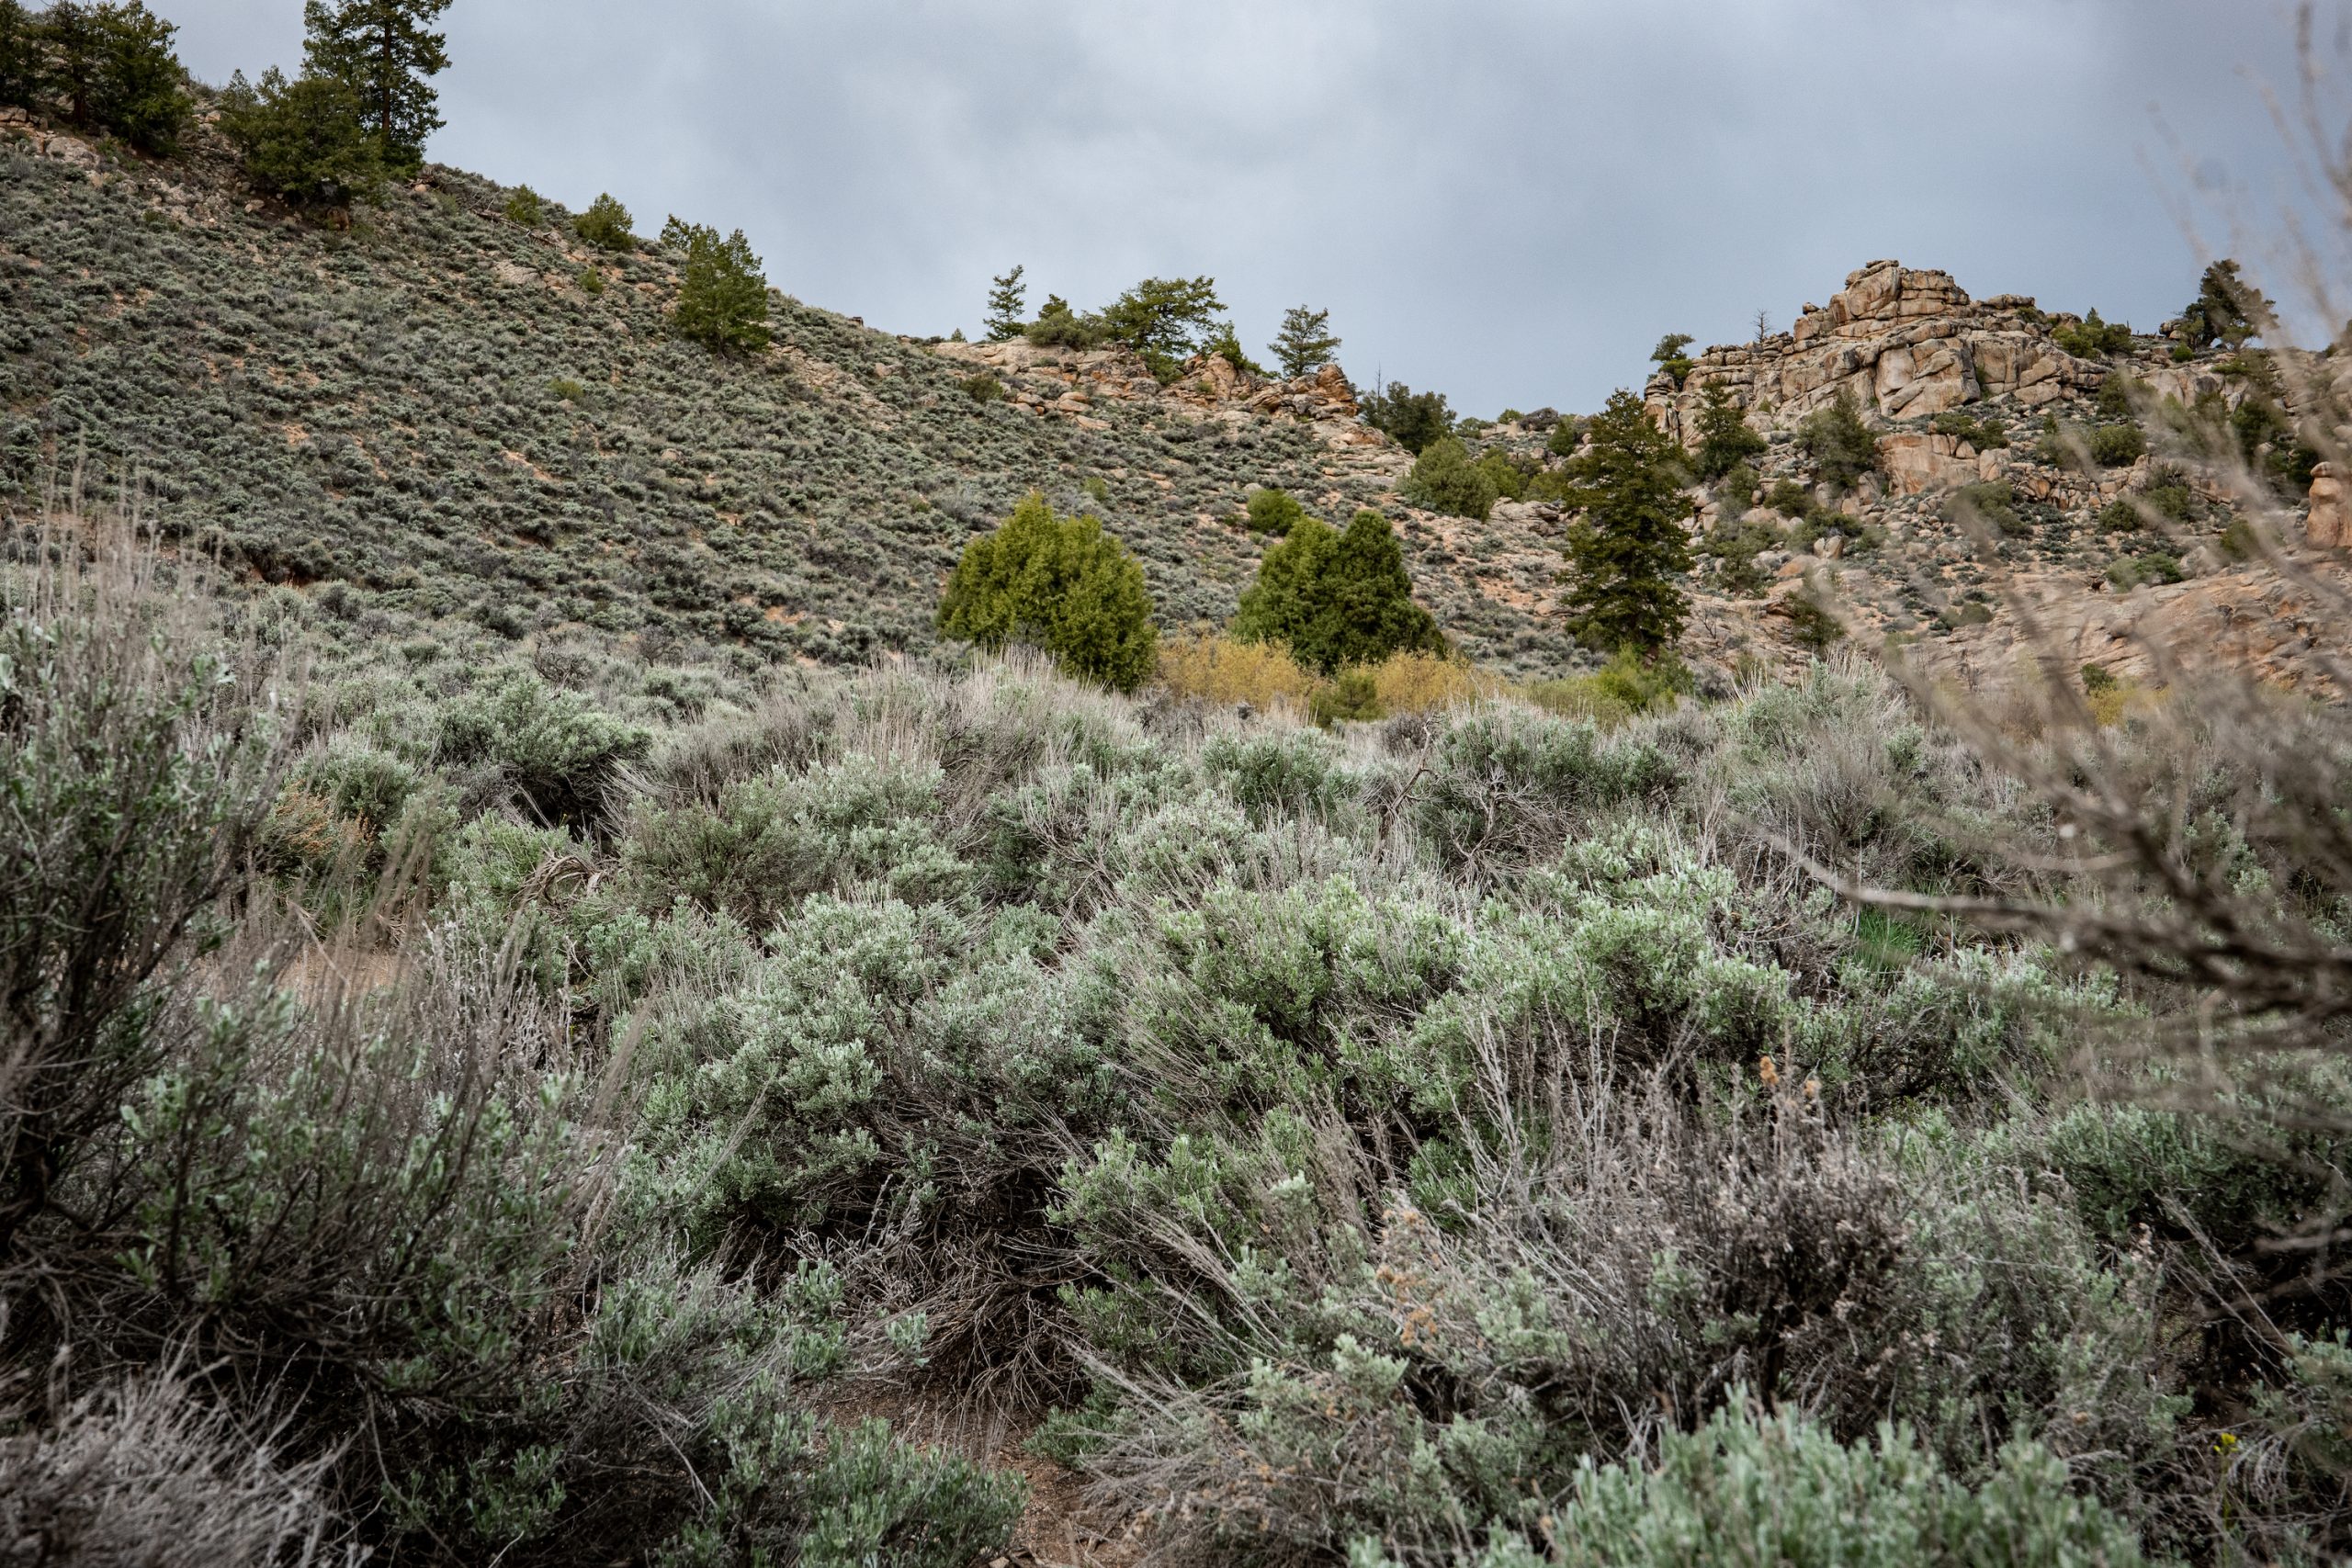 A rock formation and a hillside covered in sagebrush at Hartman Rocks in Gunnison, Colorado